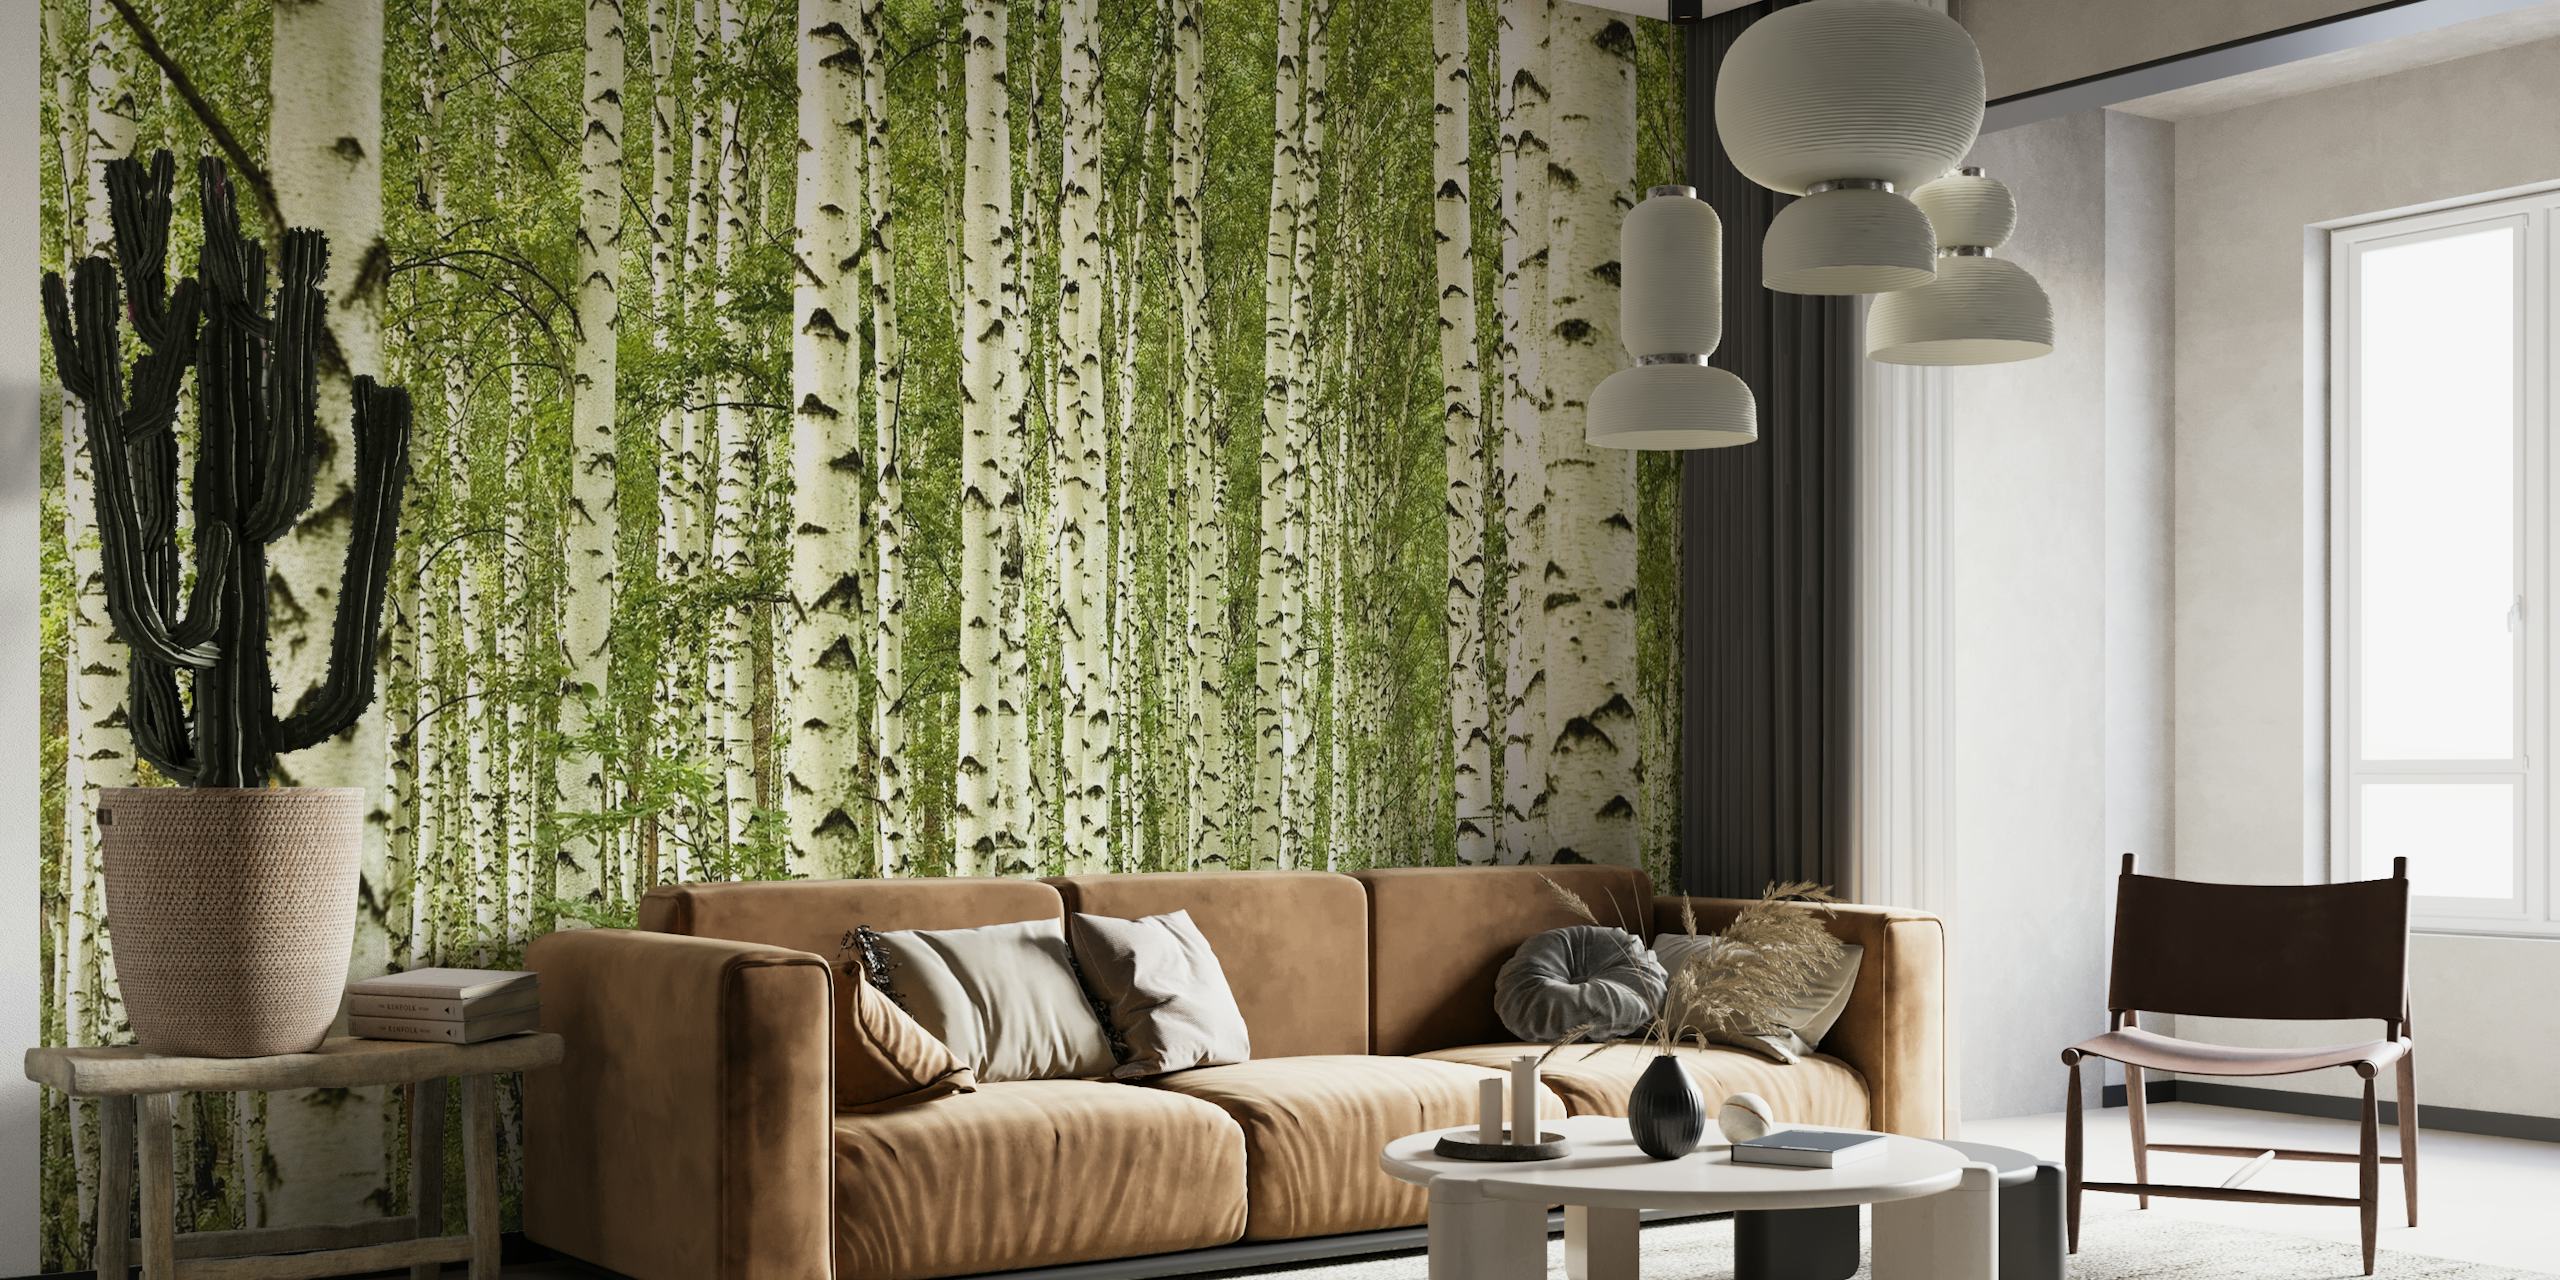 A wall mural of a dense birch forest with white and black patterned tree trunks in a lush green setting.